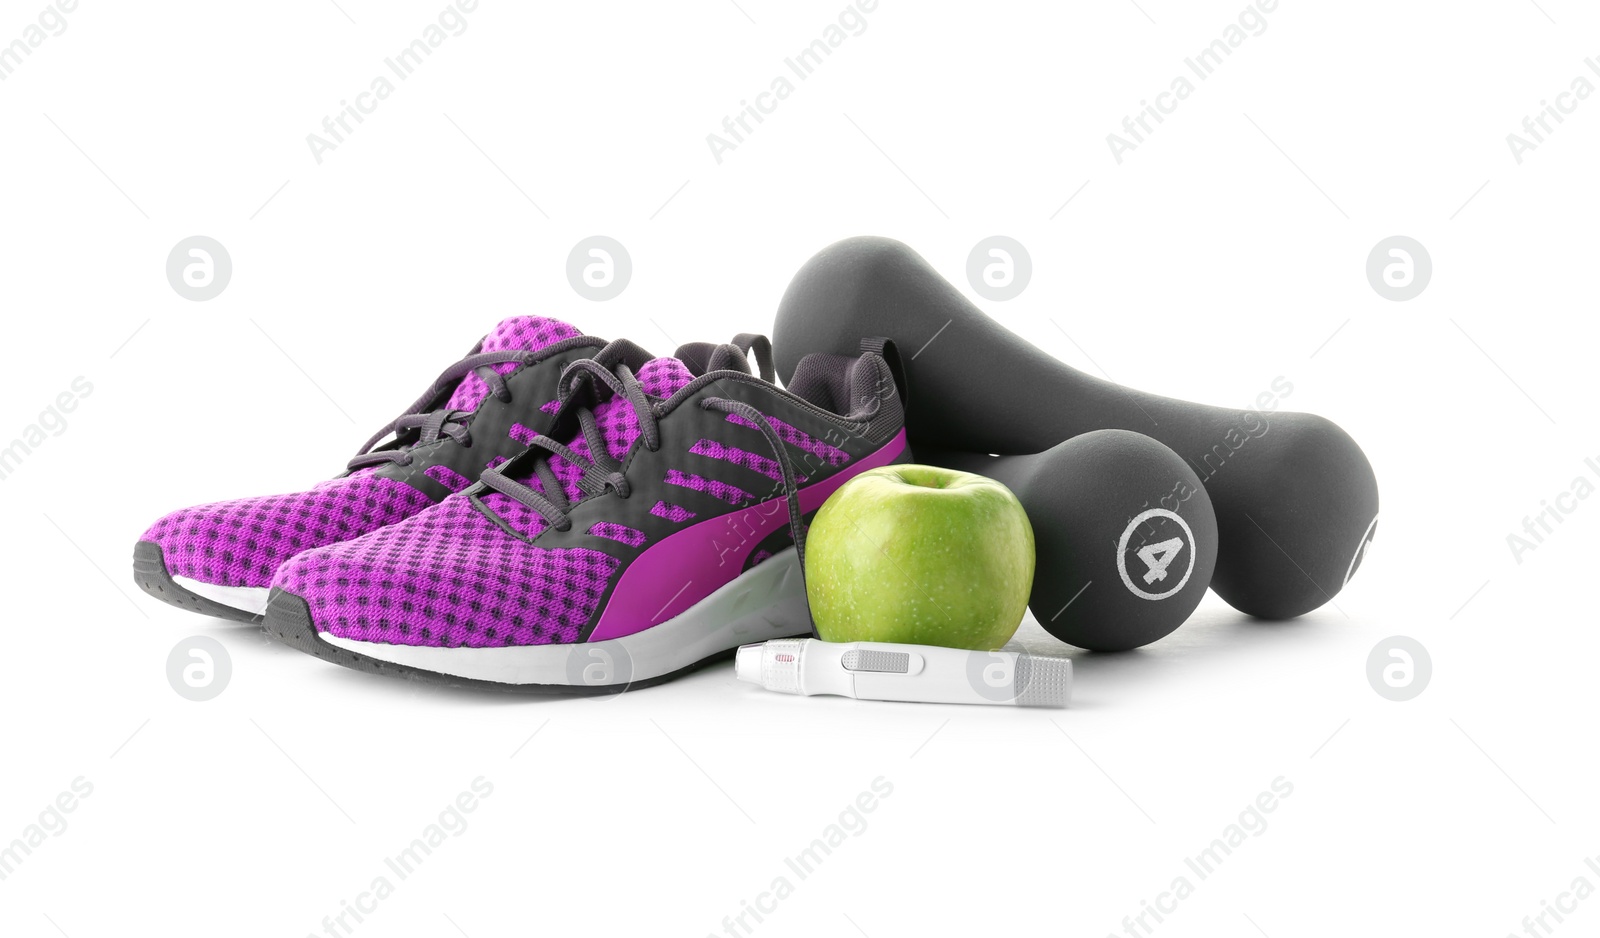 Photo of Lancet pen, dumbbells, apple and sneakers on white background. Diabetes concept